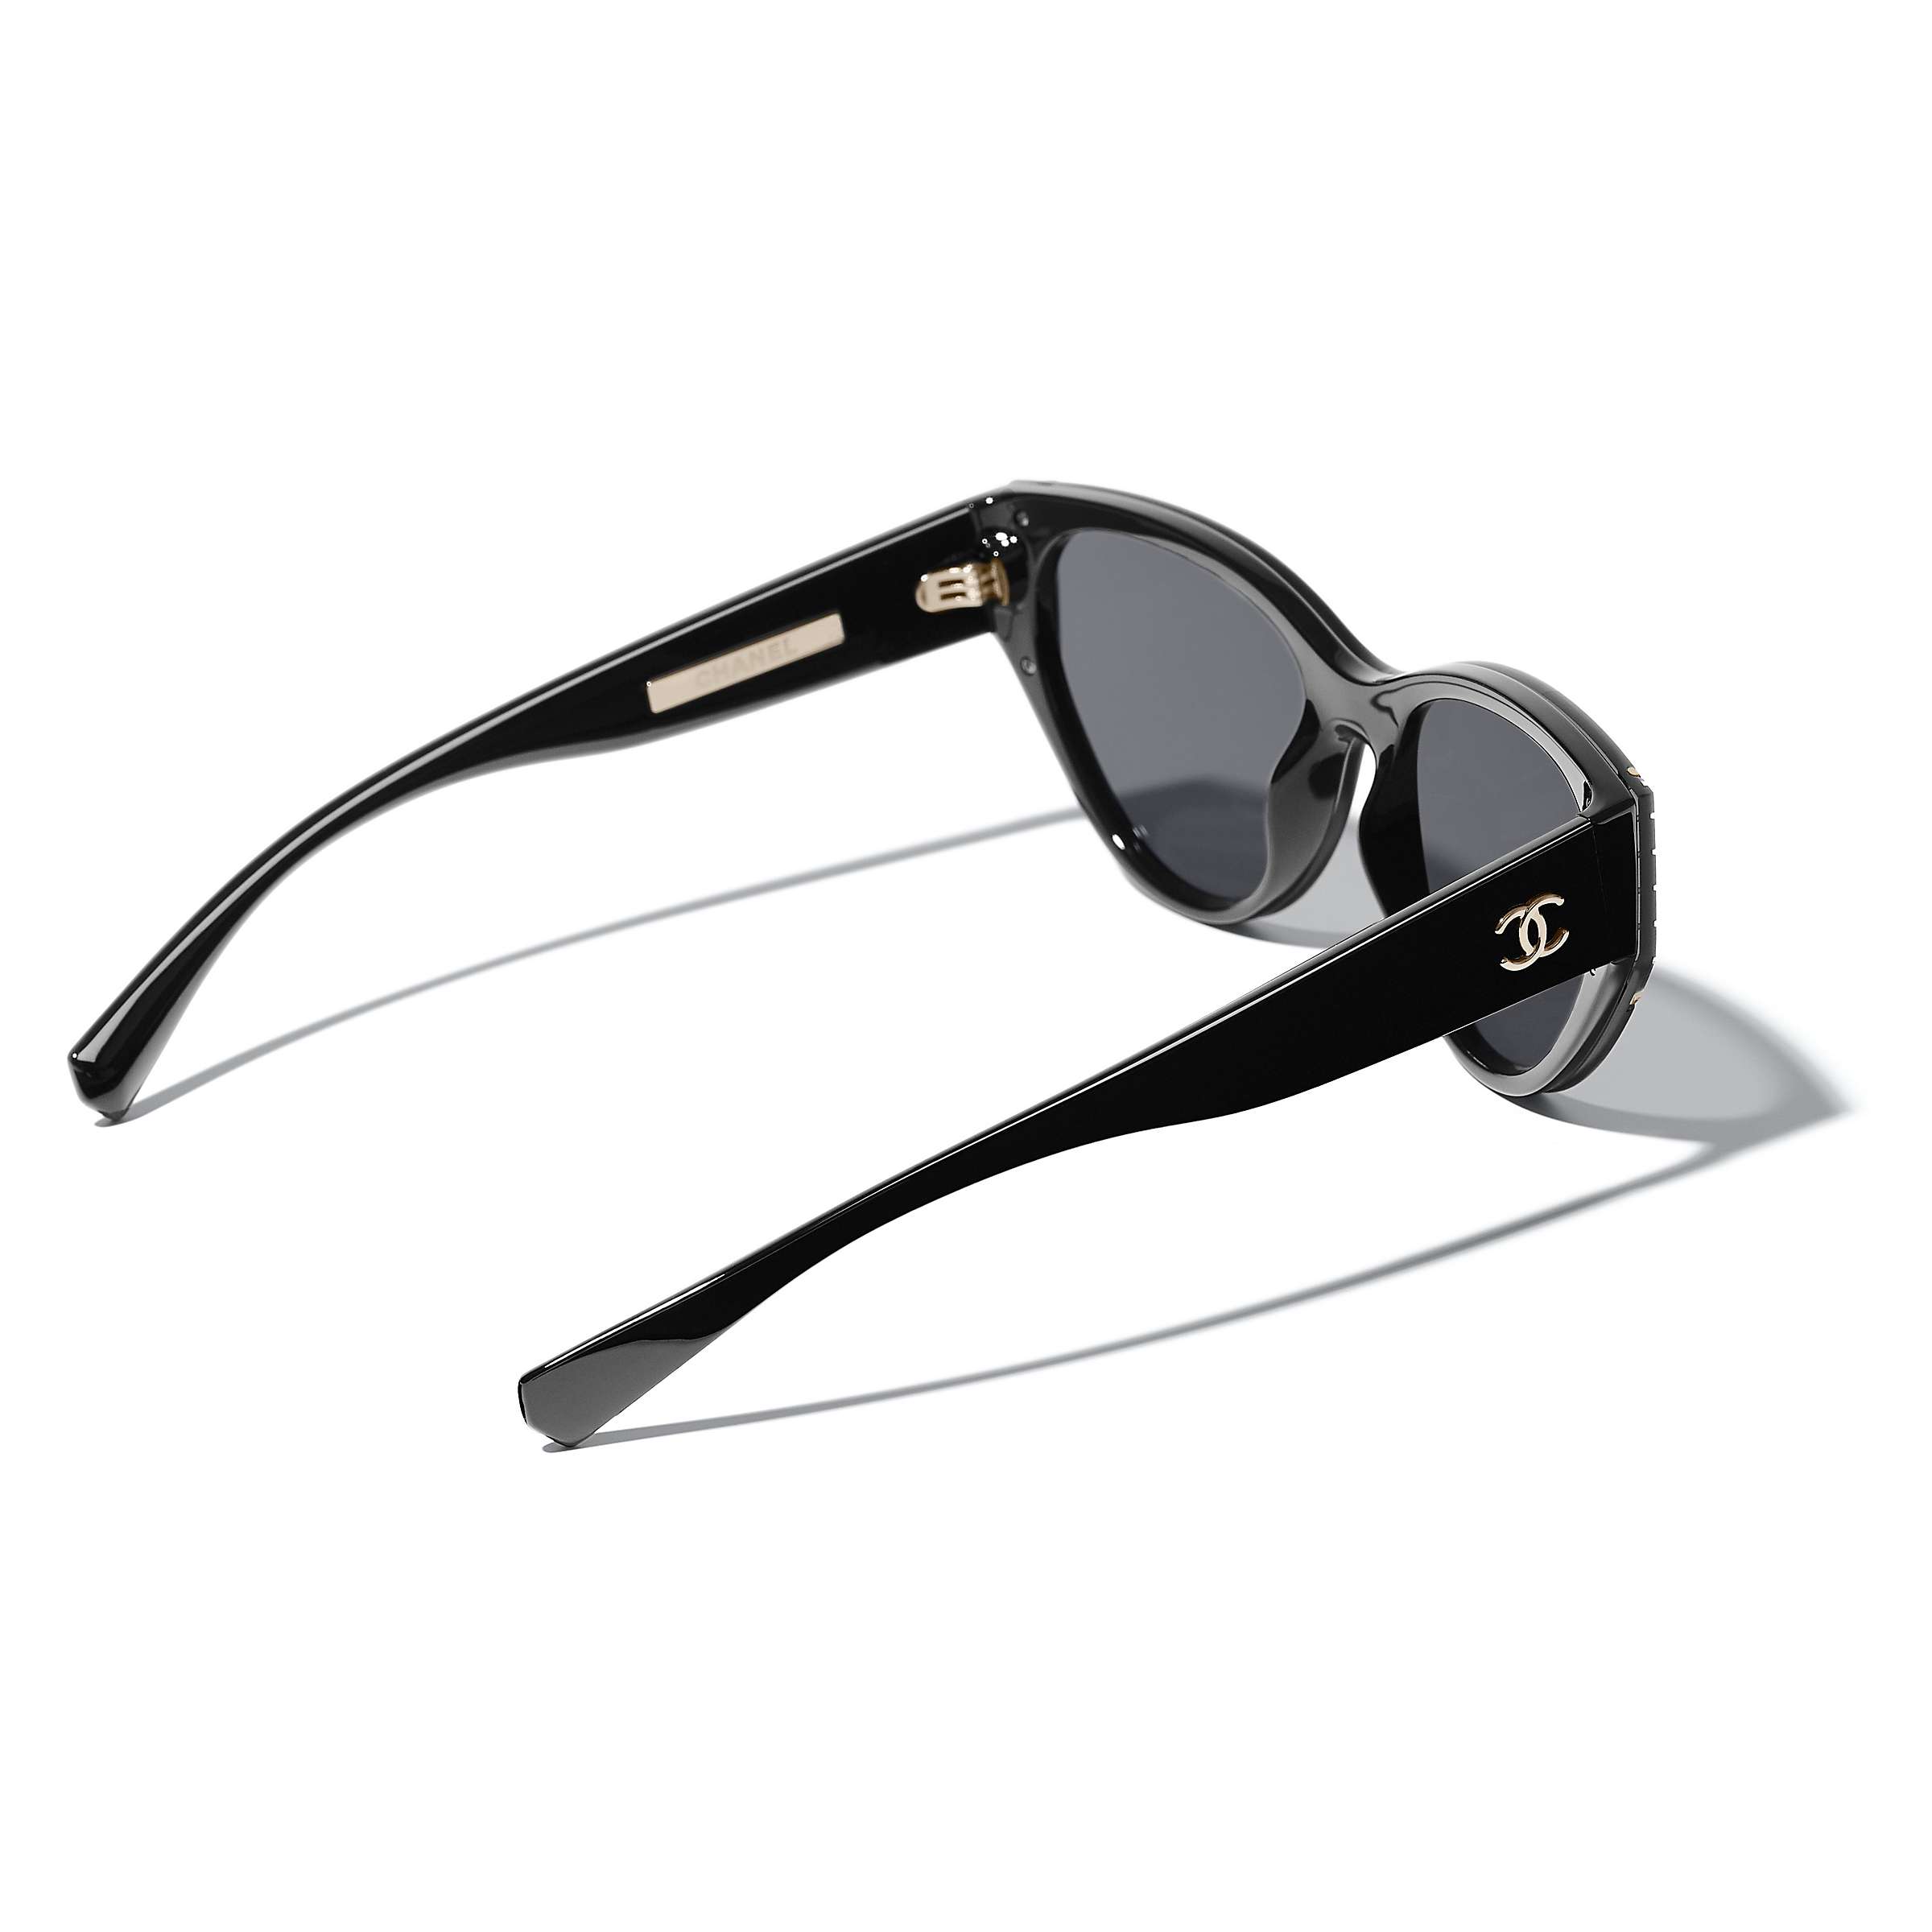 Buy CHANEL Oval Sunglasses CH6054 Black/Grey Online at johnlewis.com